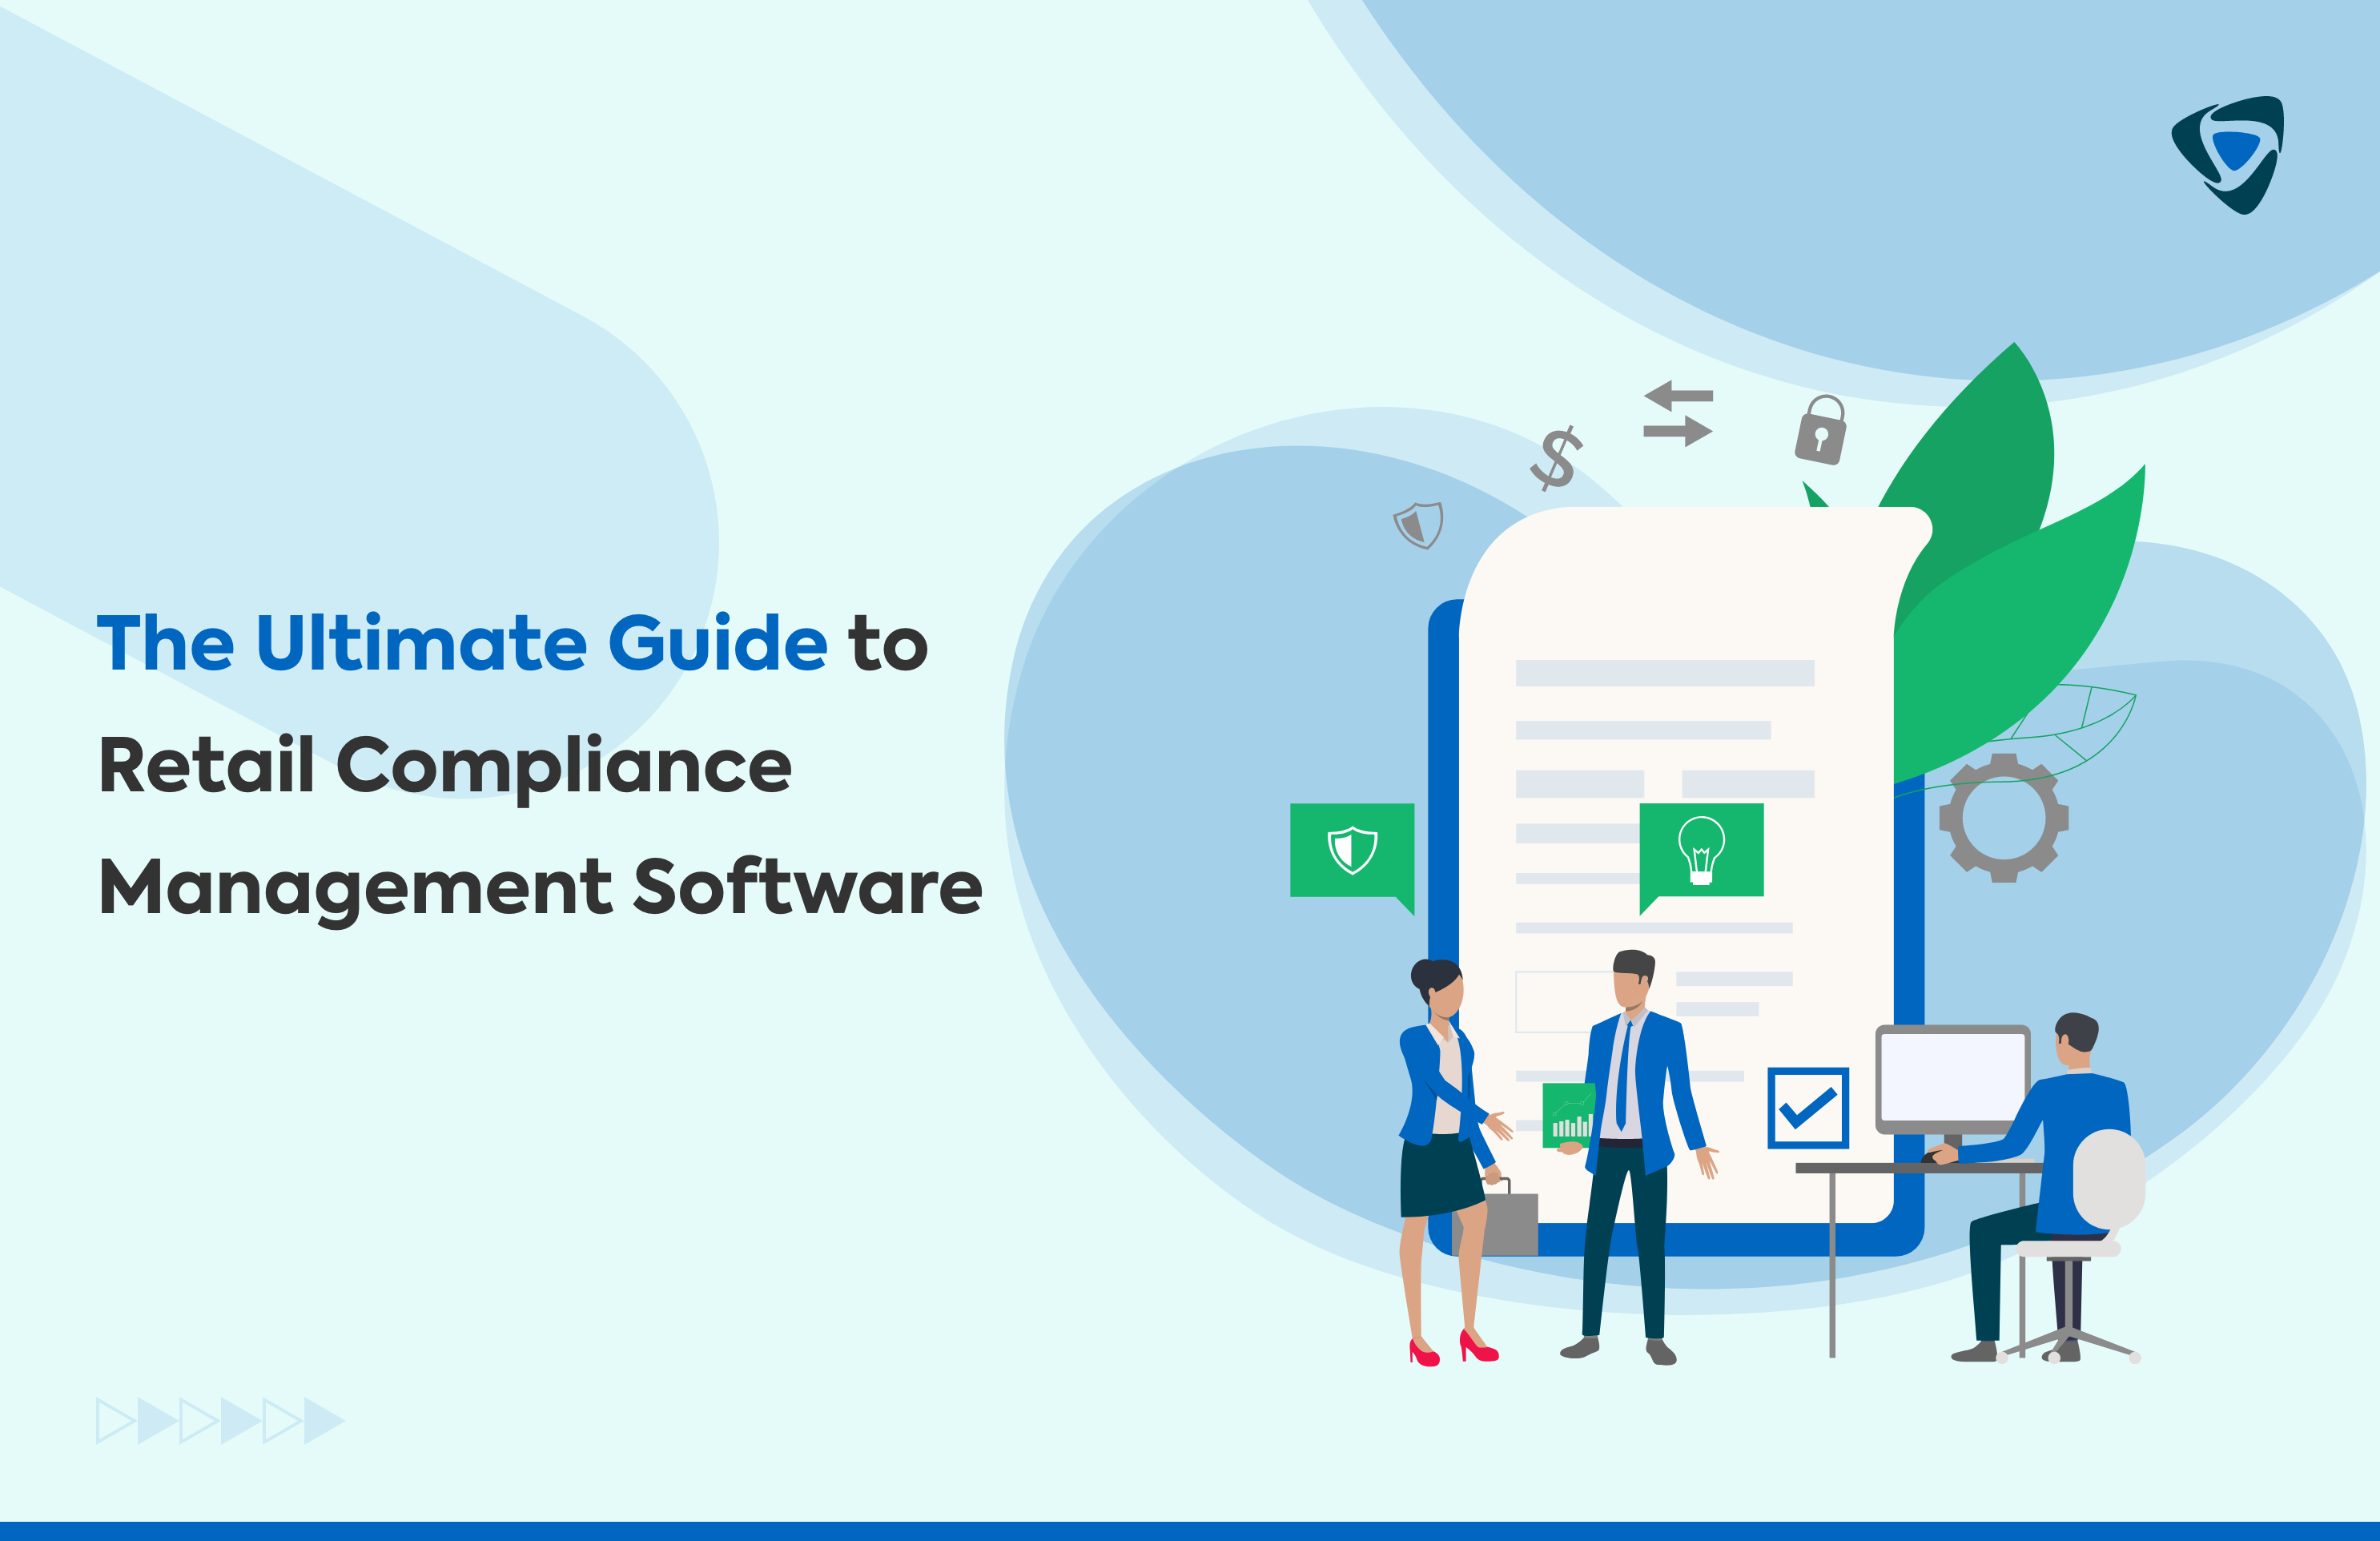 The Ultimate Guide to Retail Compliance Management Software